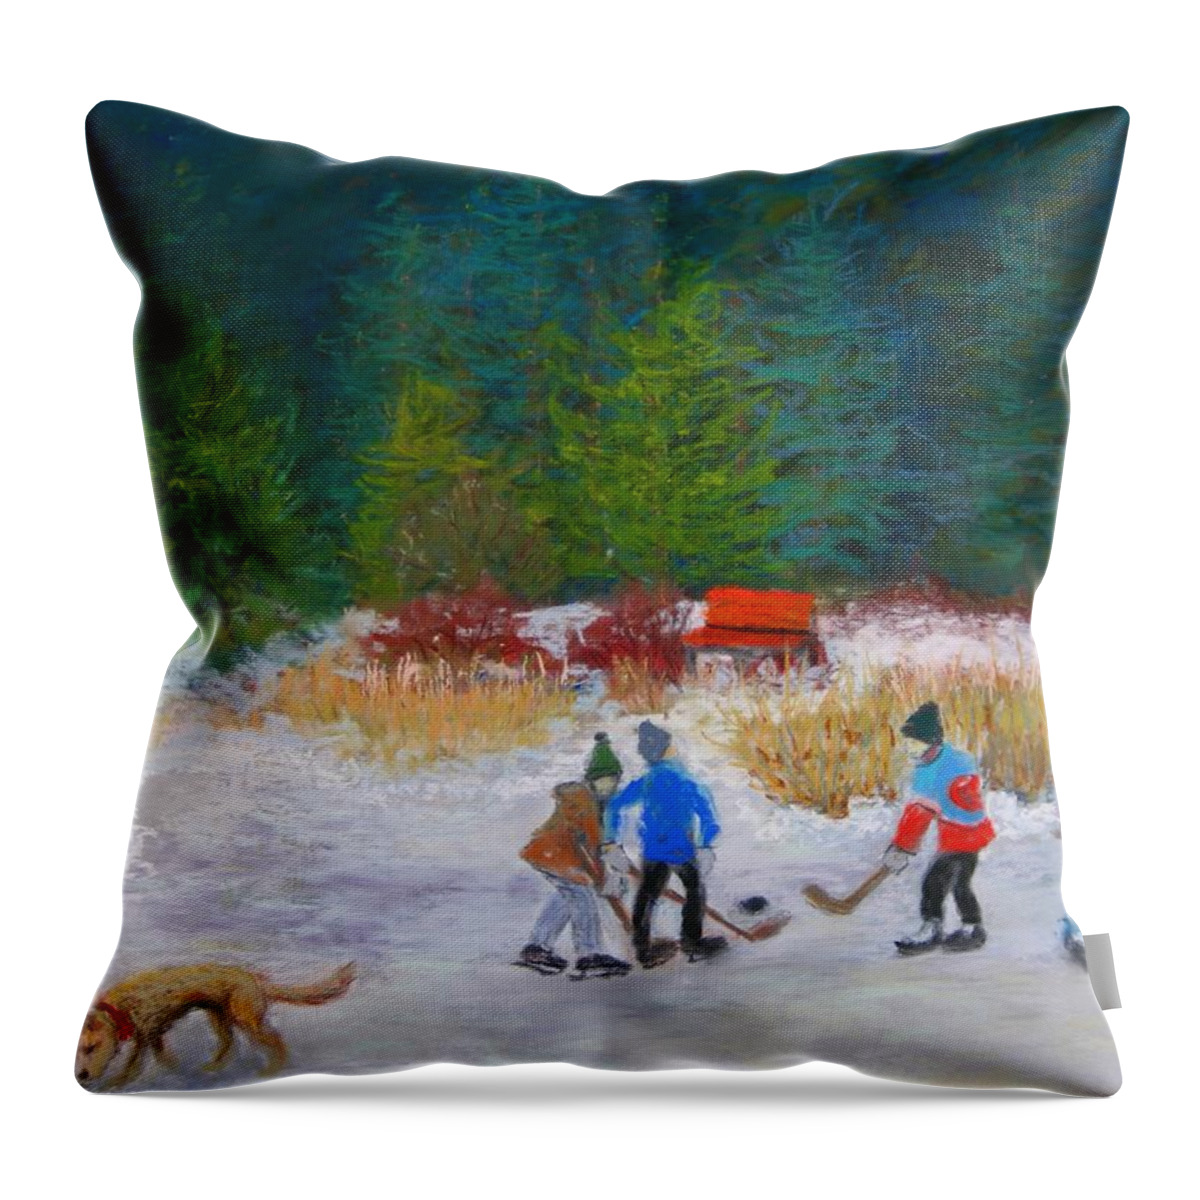 Ice Hockey Throw Pillow featuring the painting Outdoor Ice Hockey by Minaz Jantz